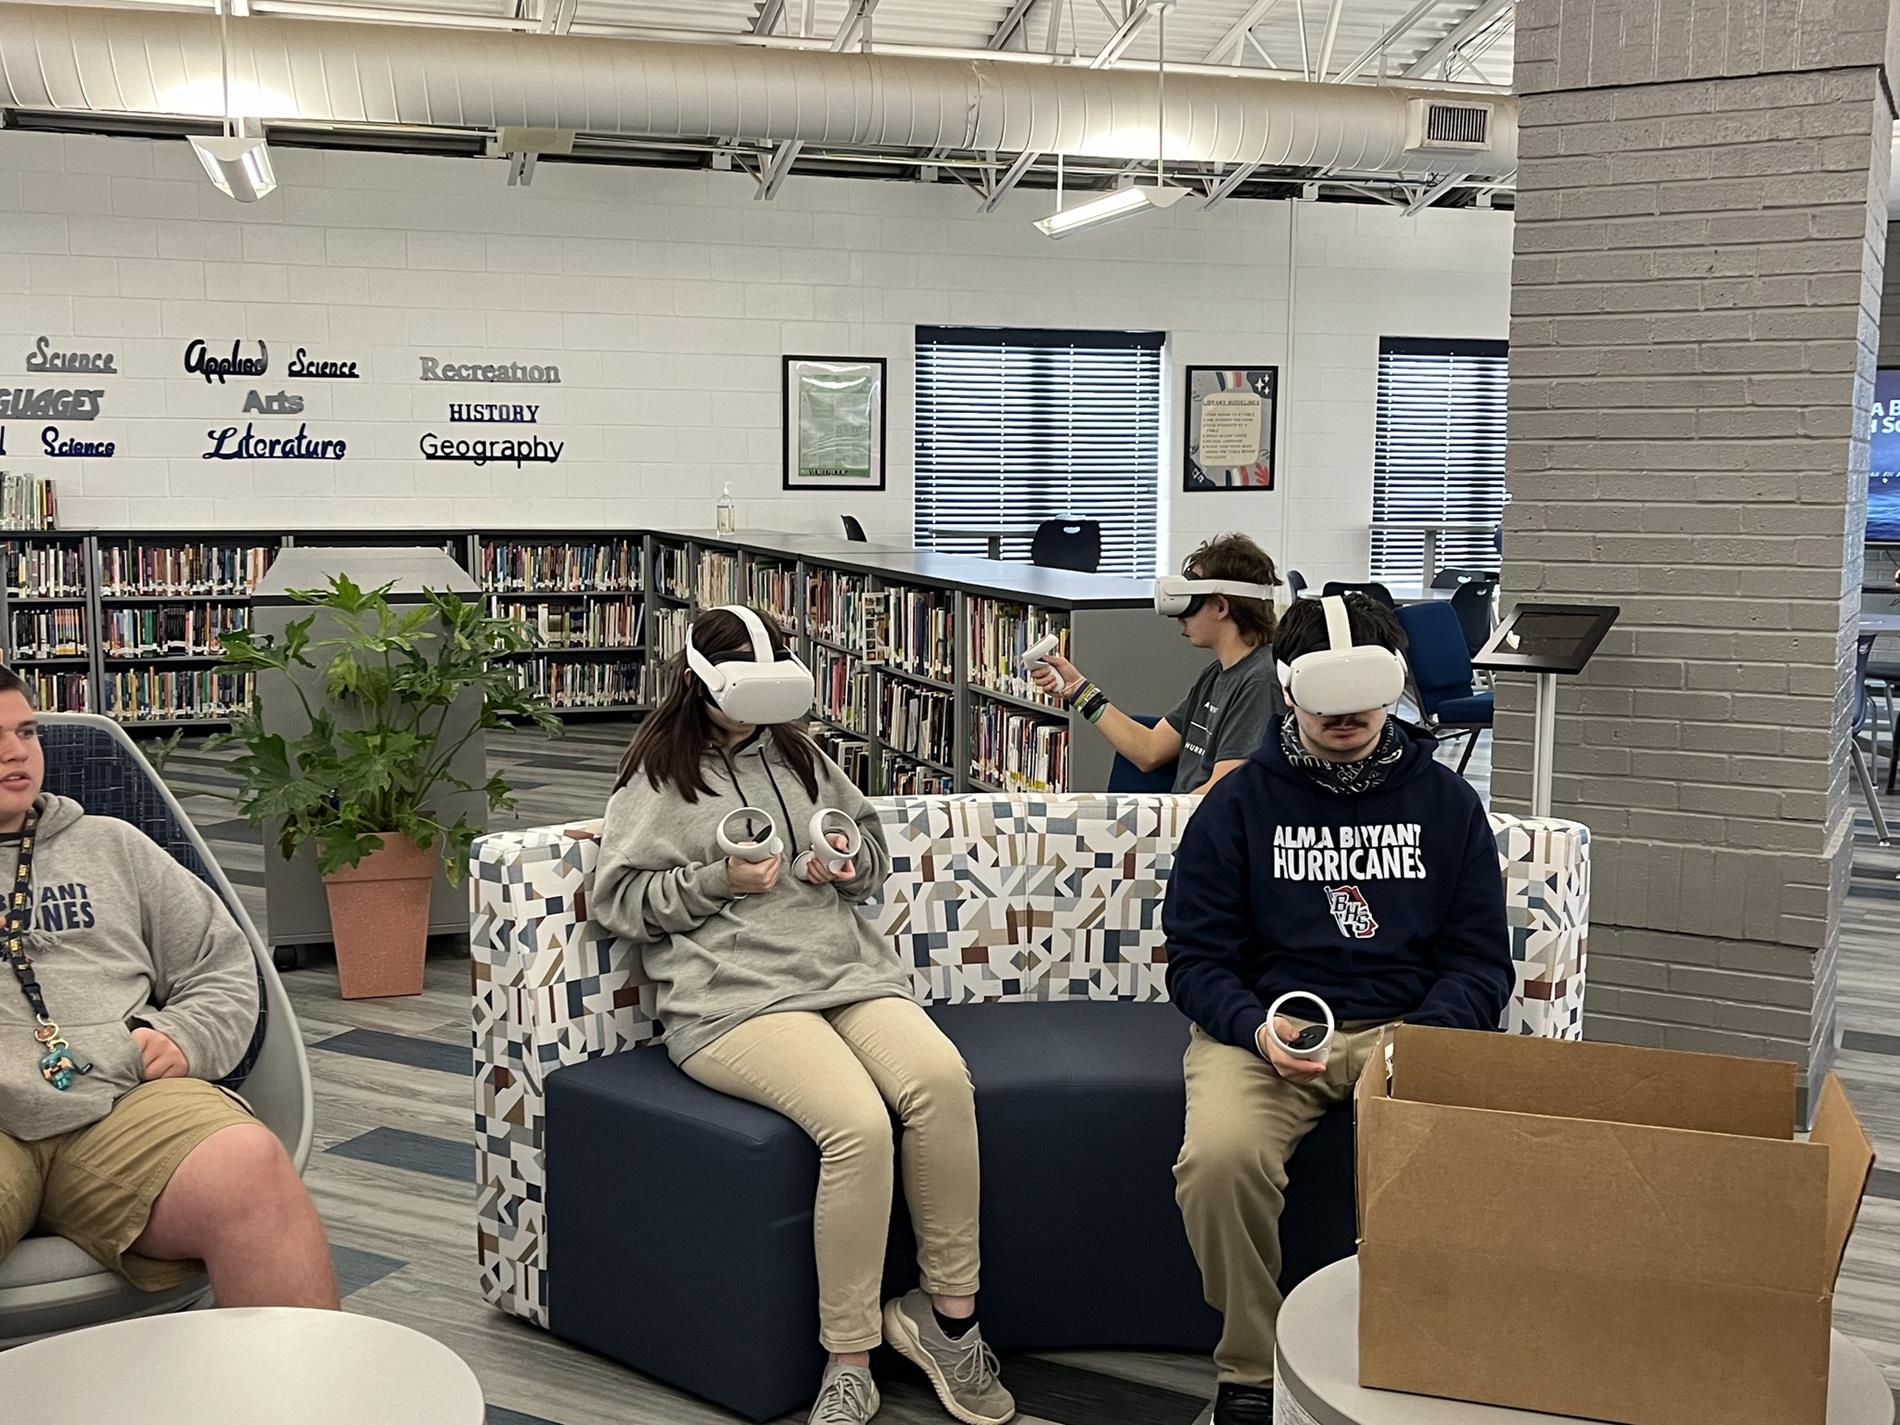 Fun with VR headsets in the library